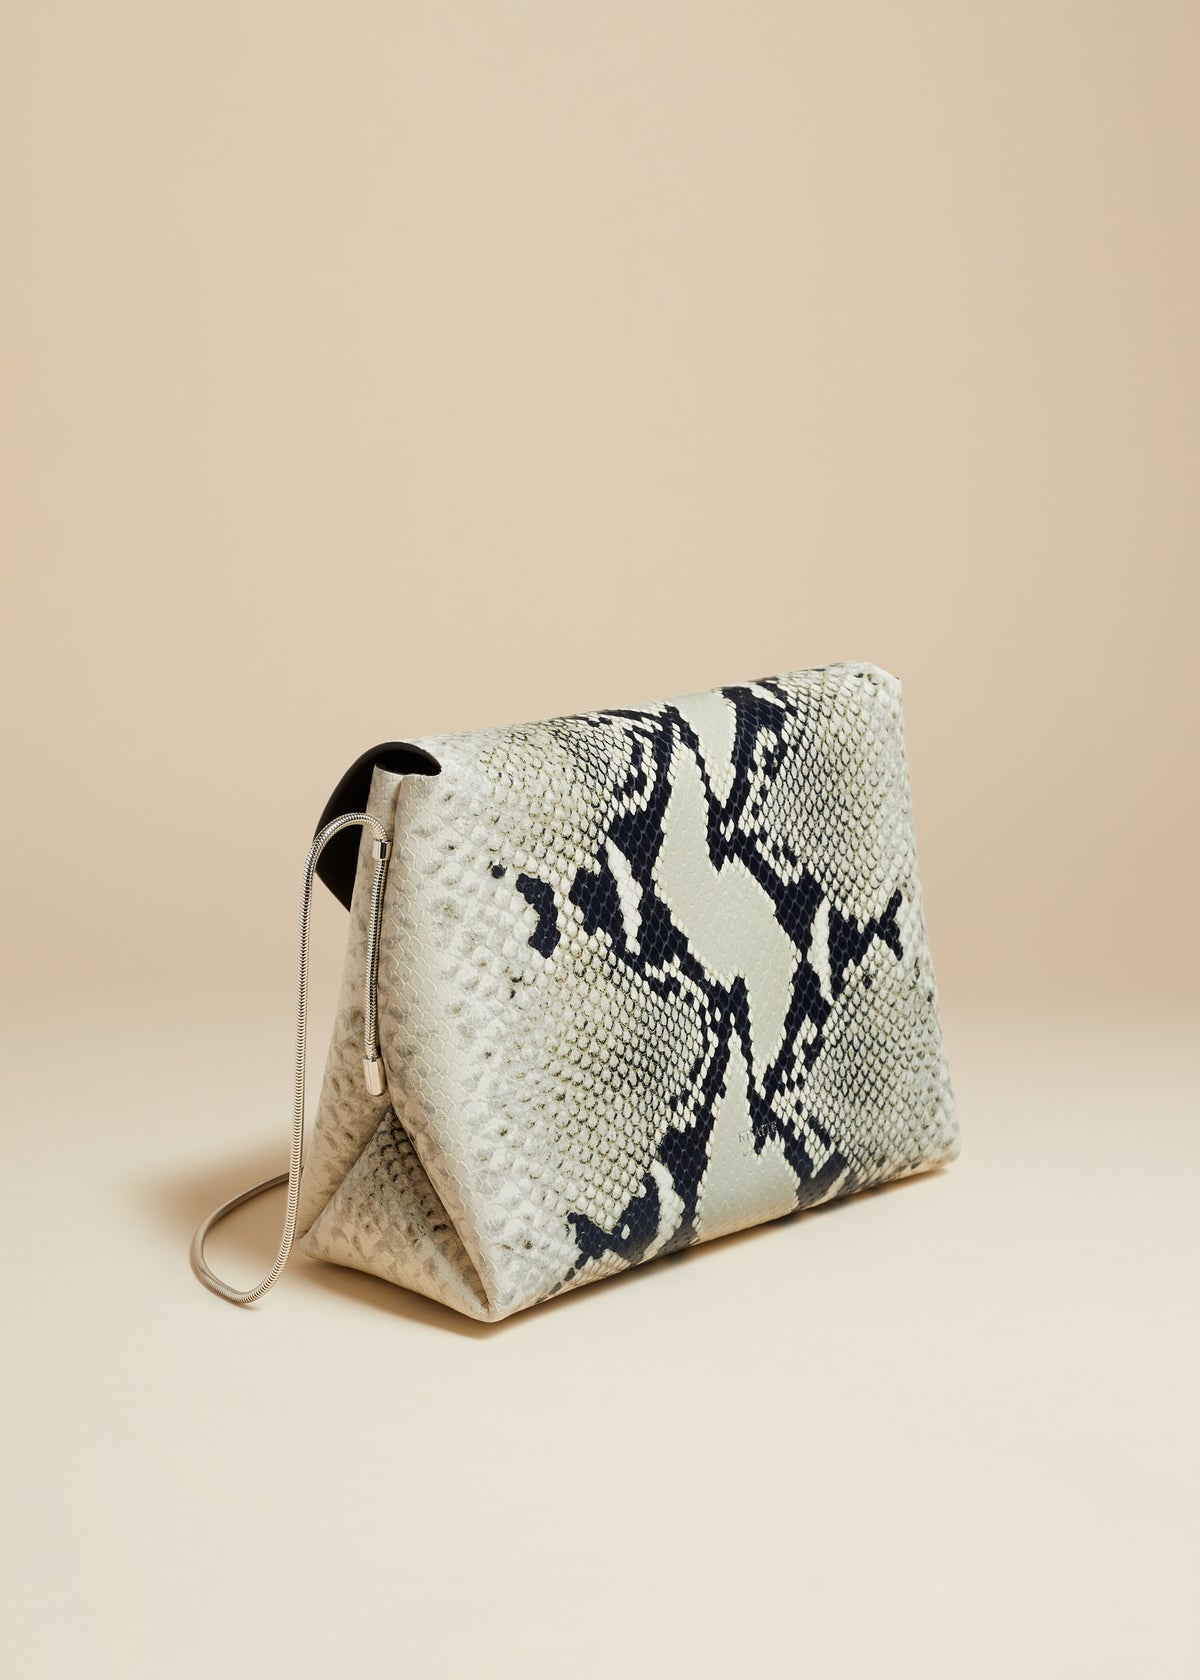 The Bobbi Bag in Natural Python-Embossed Leather - 2